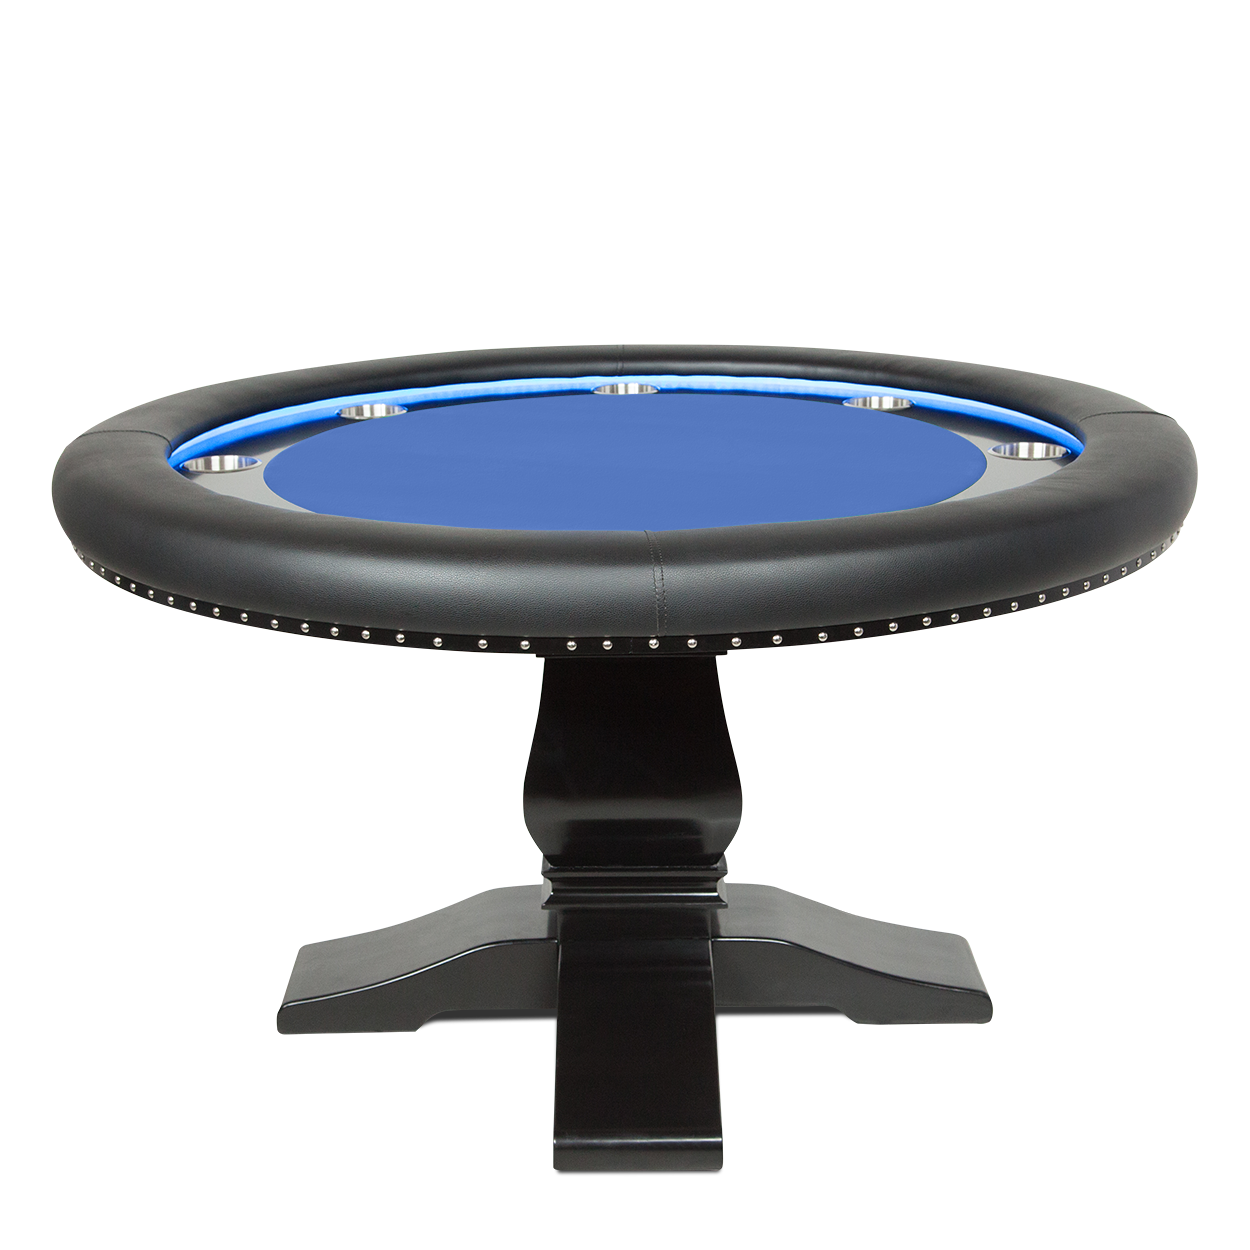 Round poker table with LEDs, blue game top and oak pedastal leg in a black finish.